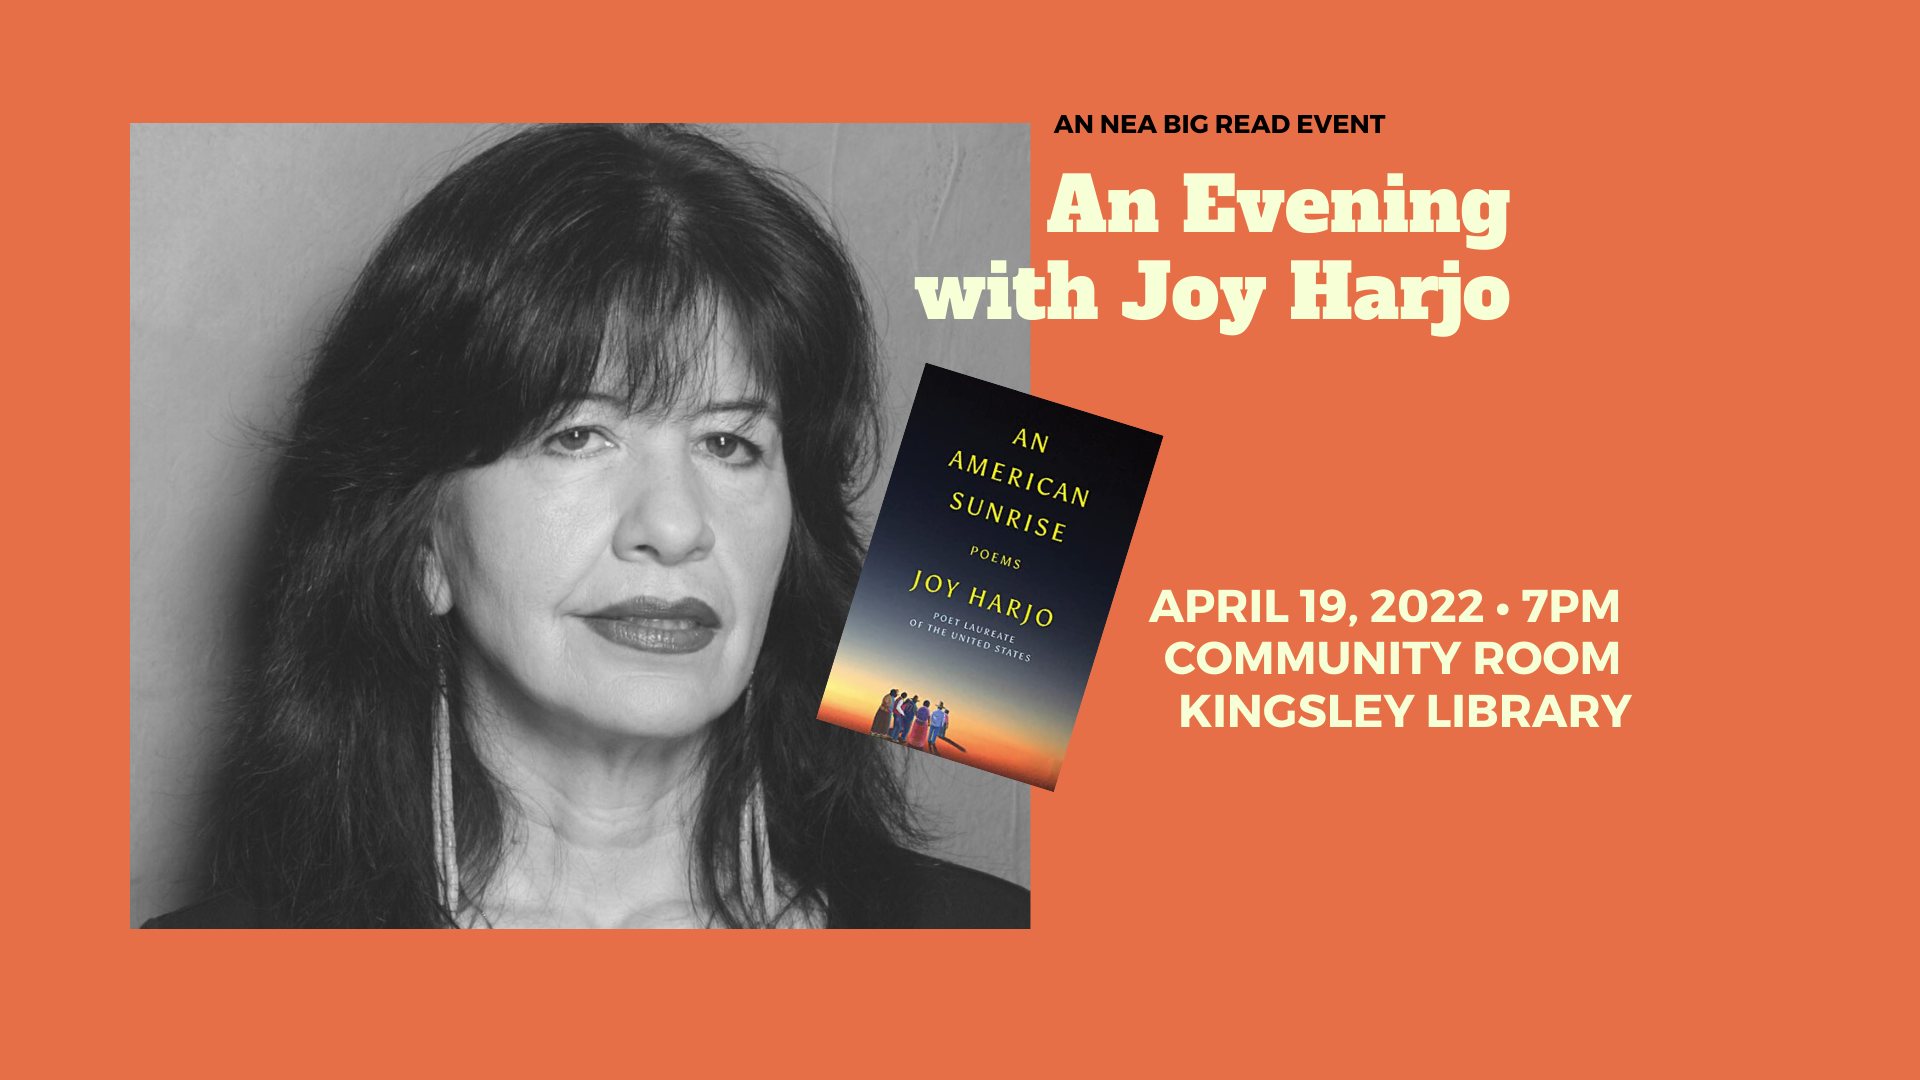 Image of author Joy Harjo's face and the cover of her book "An American Sunrise: Poems." Text over image says an NEA Big Read Event, April 19, 2022 at 7 pm, Community Room of Kingsley Branch Library.